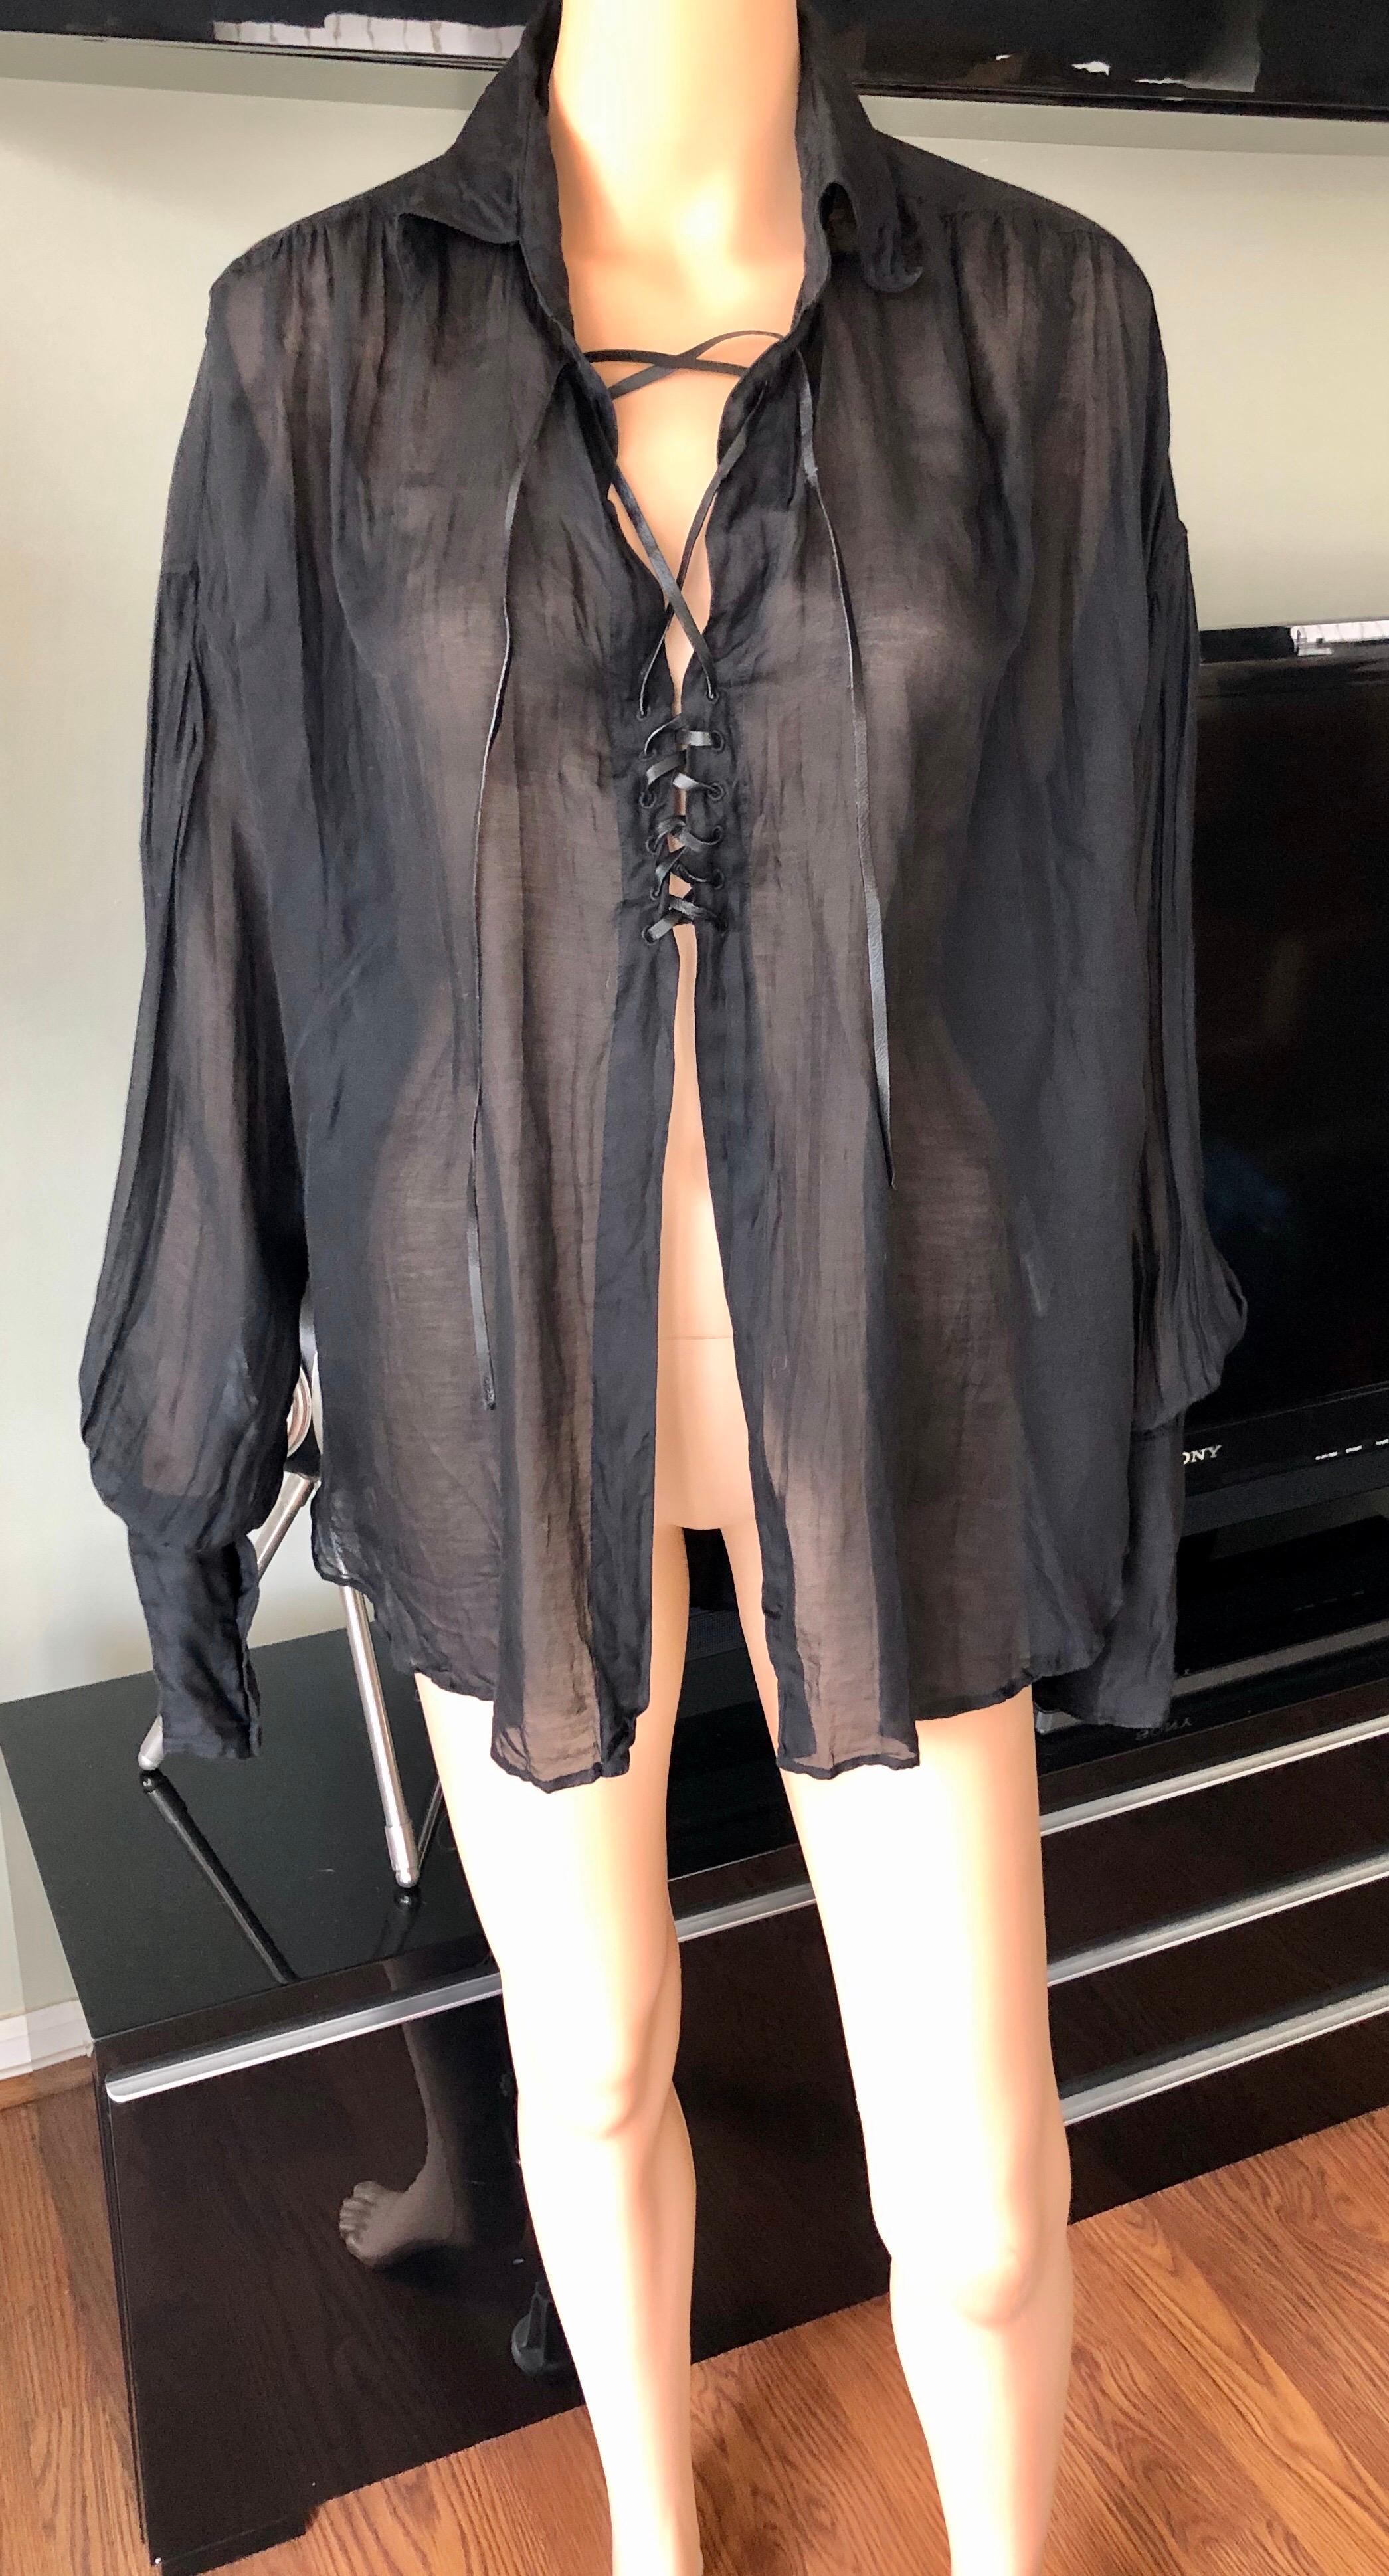 Tom Ford for Gucci F/W 2002 Sheer Plunging Lace-Up Black Tunic Shirt ...